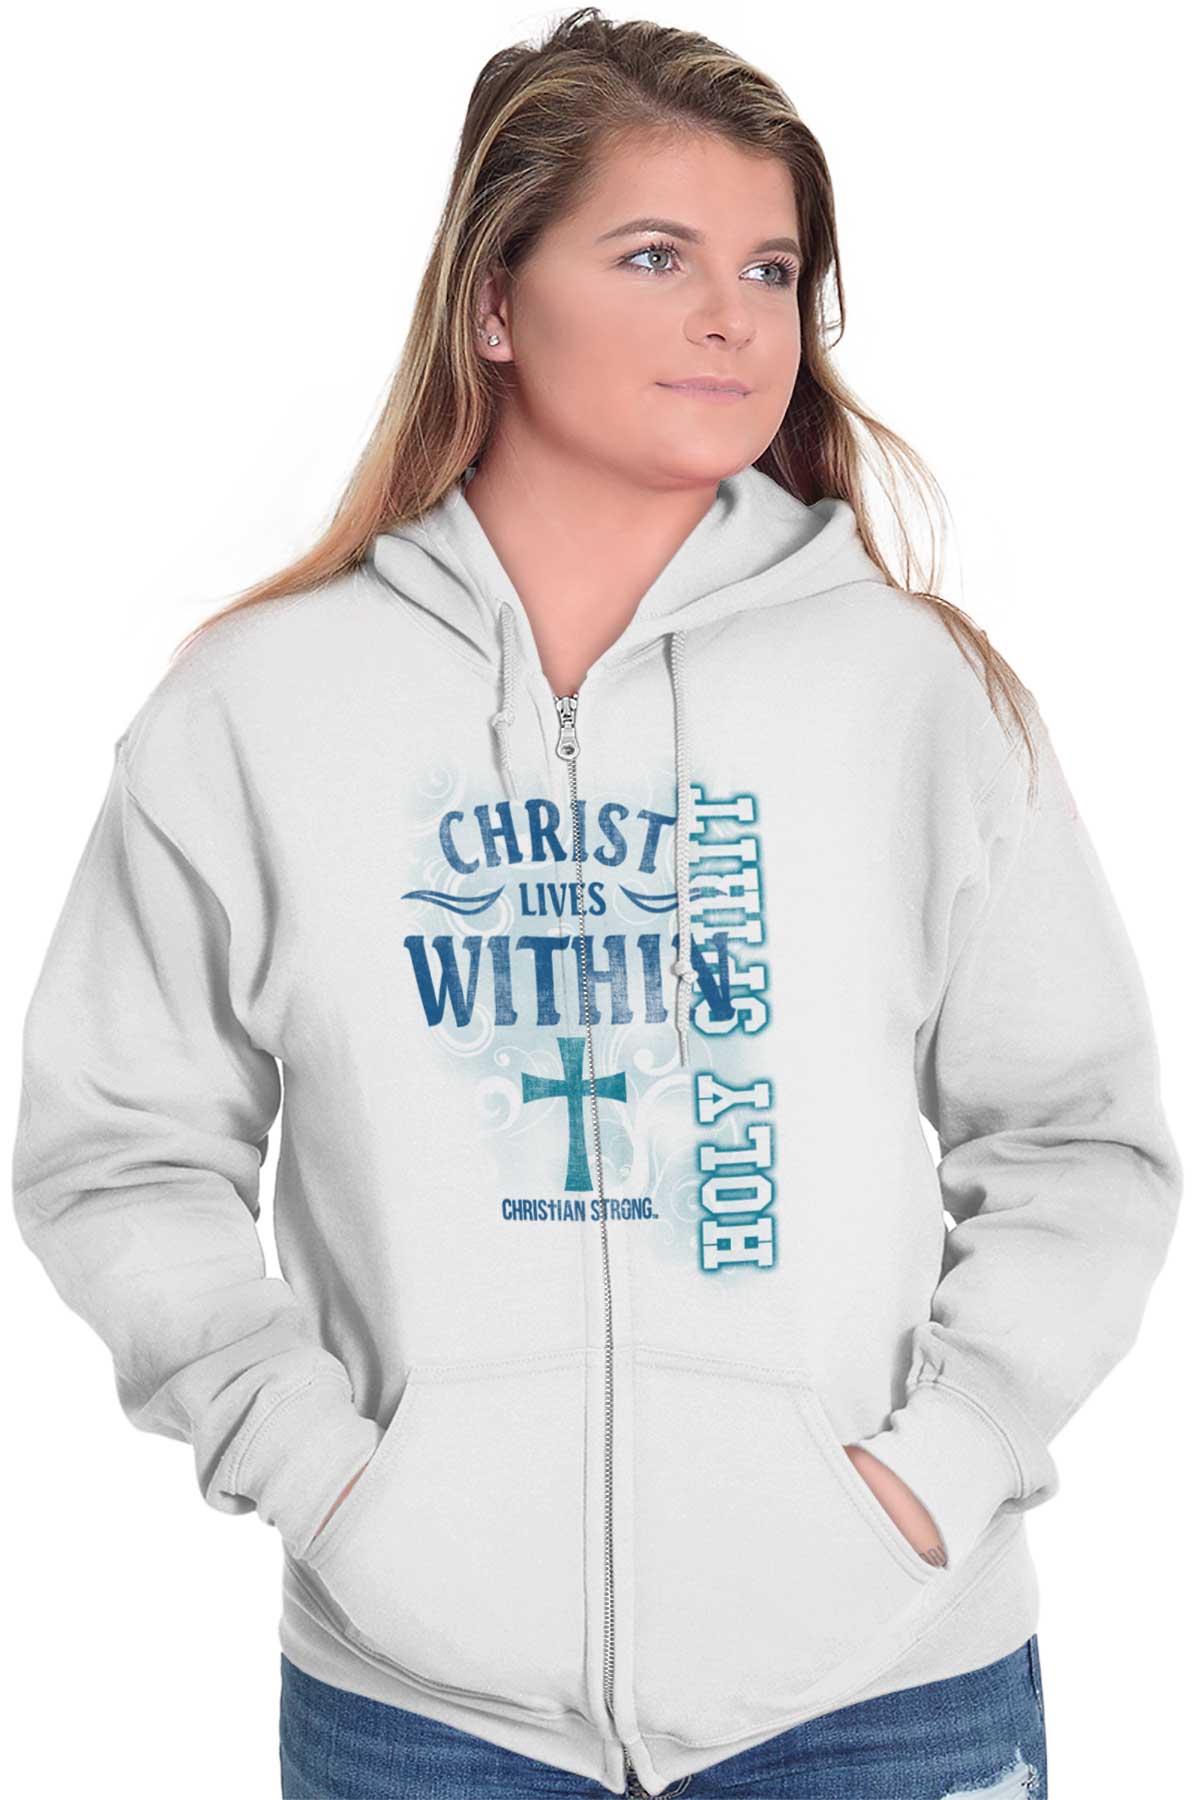 Christ Lives Within Full Zip Hooded Sweatshirt | – Christian Strong